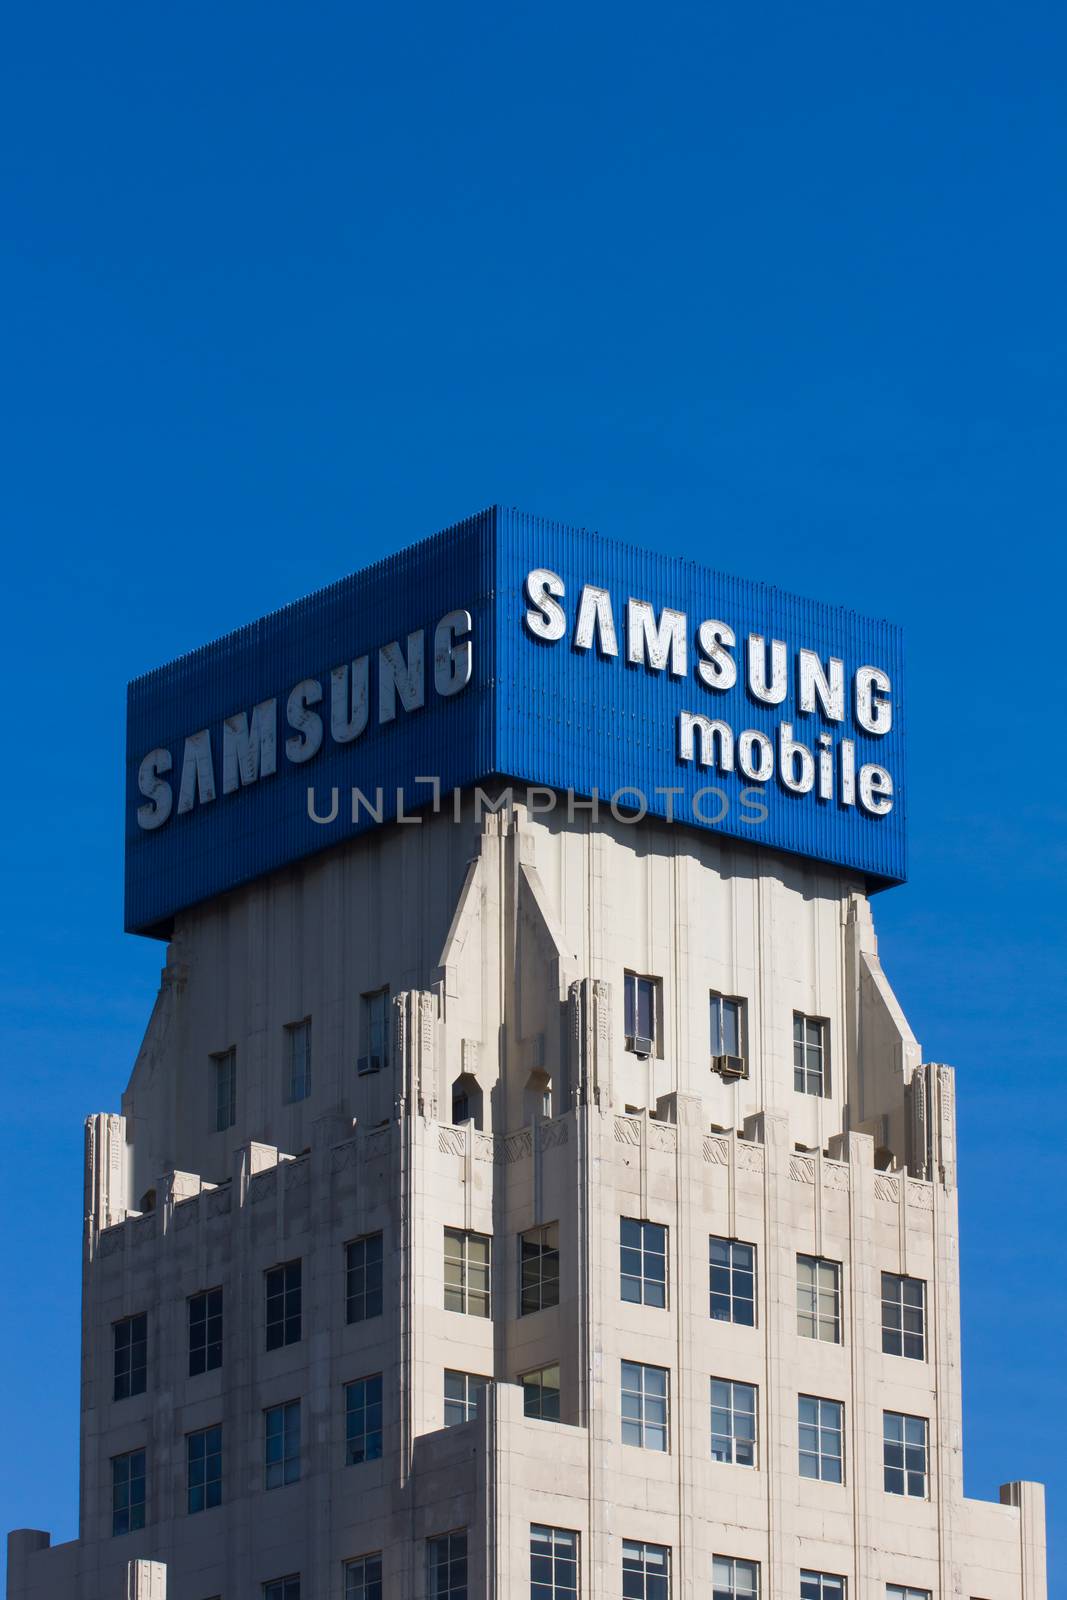 LOS ANGELES, CA/USA - NOVEMBER 29, 2014: Samsung Mobile advertisement and logo. Samsung is a South Korean multinational conglomerate company.